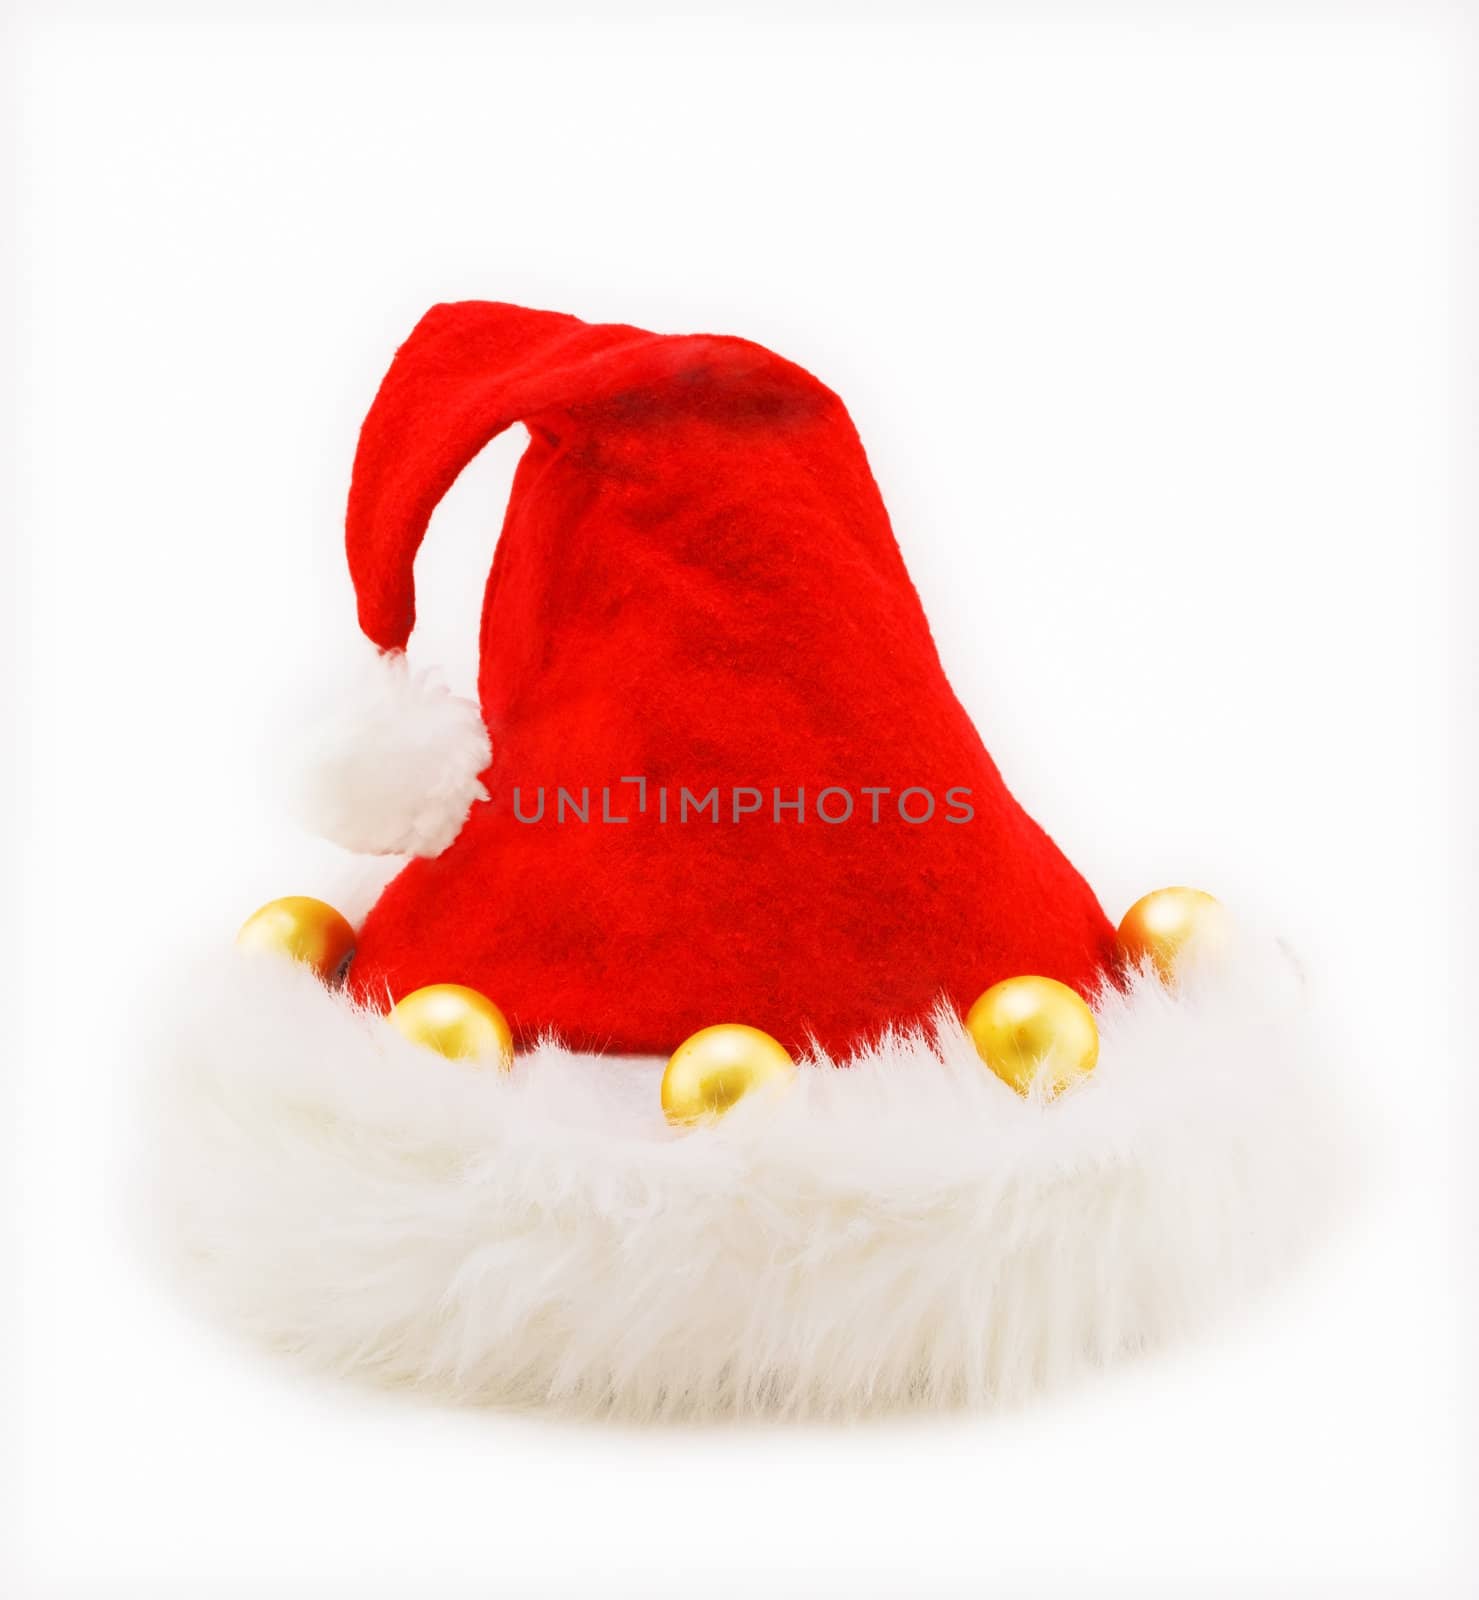 Red Christmas hat made of wool with yellow balls on white